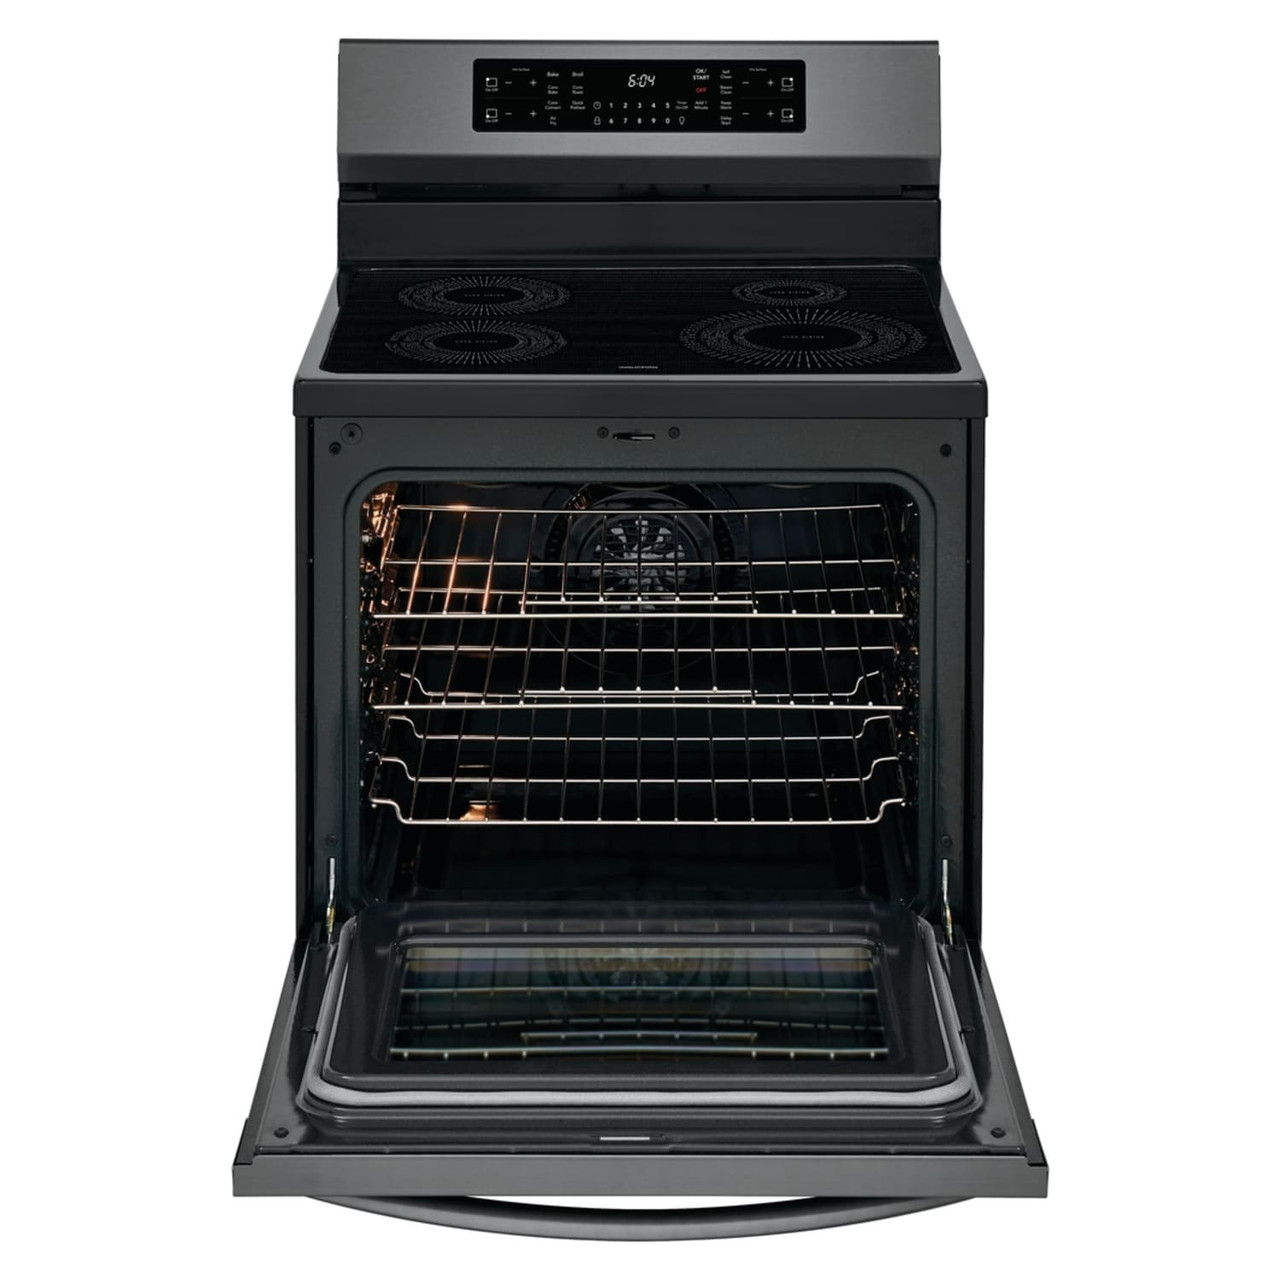 Frigidaire Gallery 30” Freestanding Induction Range with Air Fry - GCRI3058AD